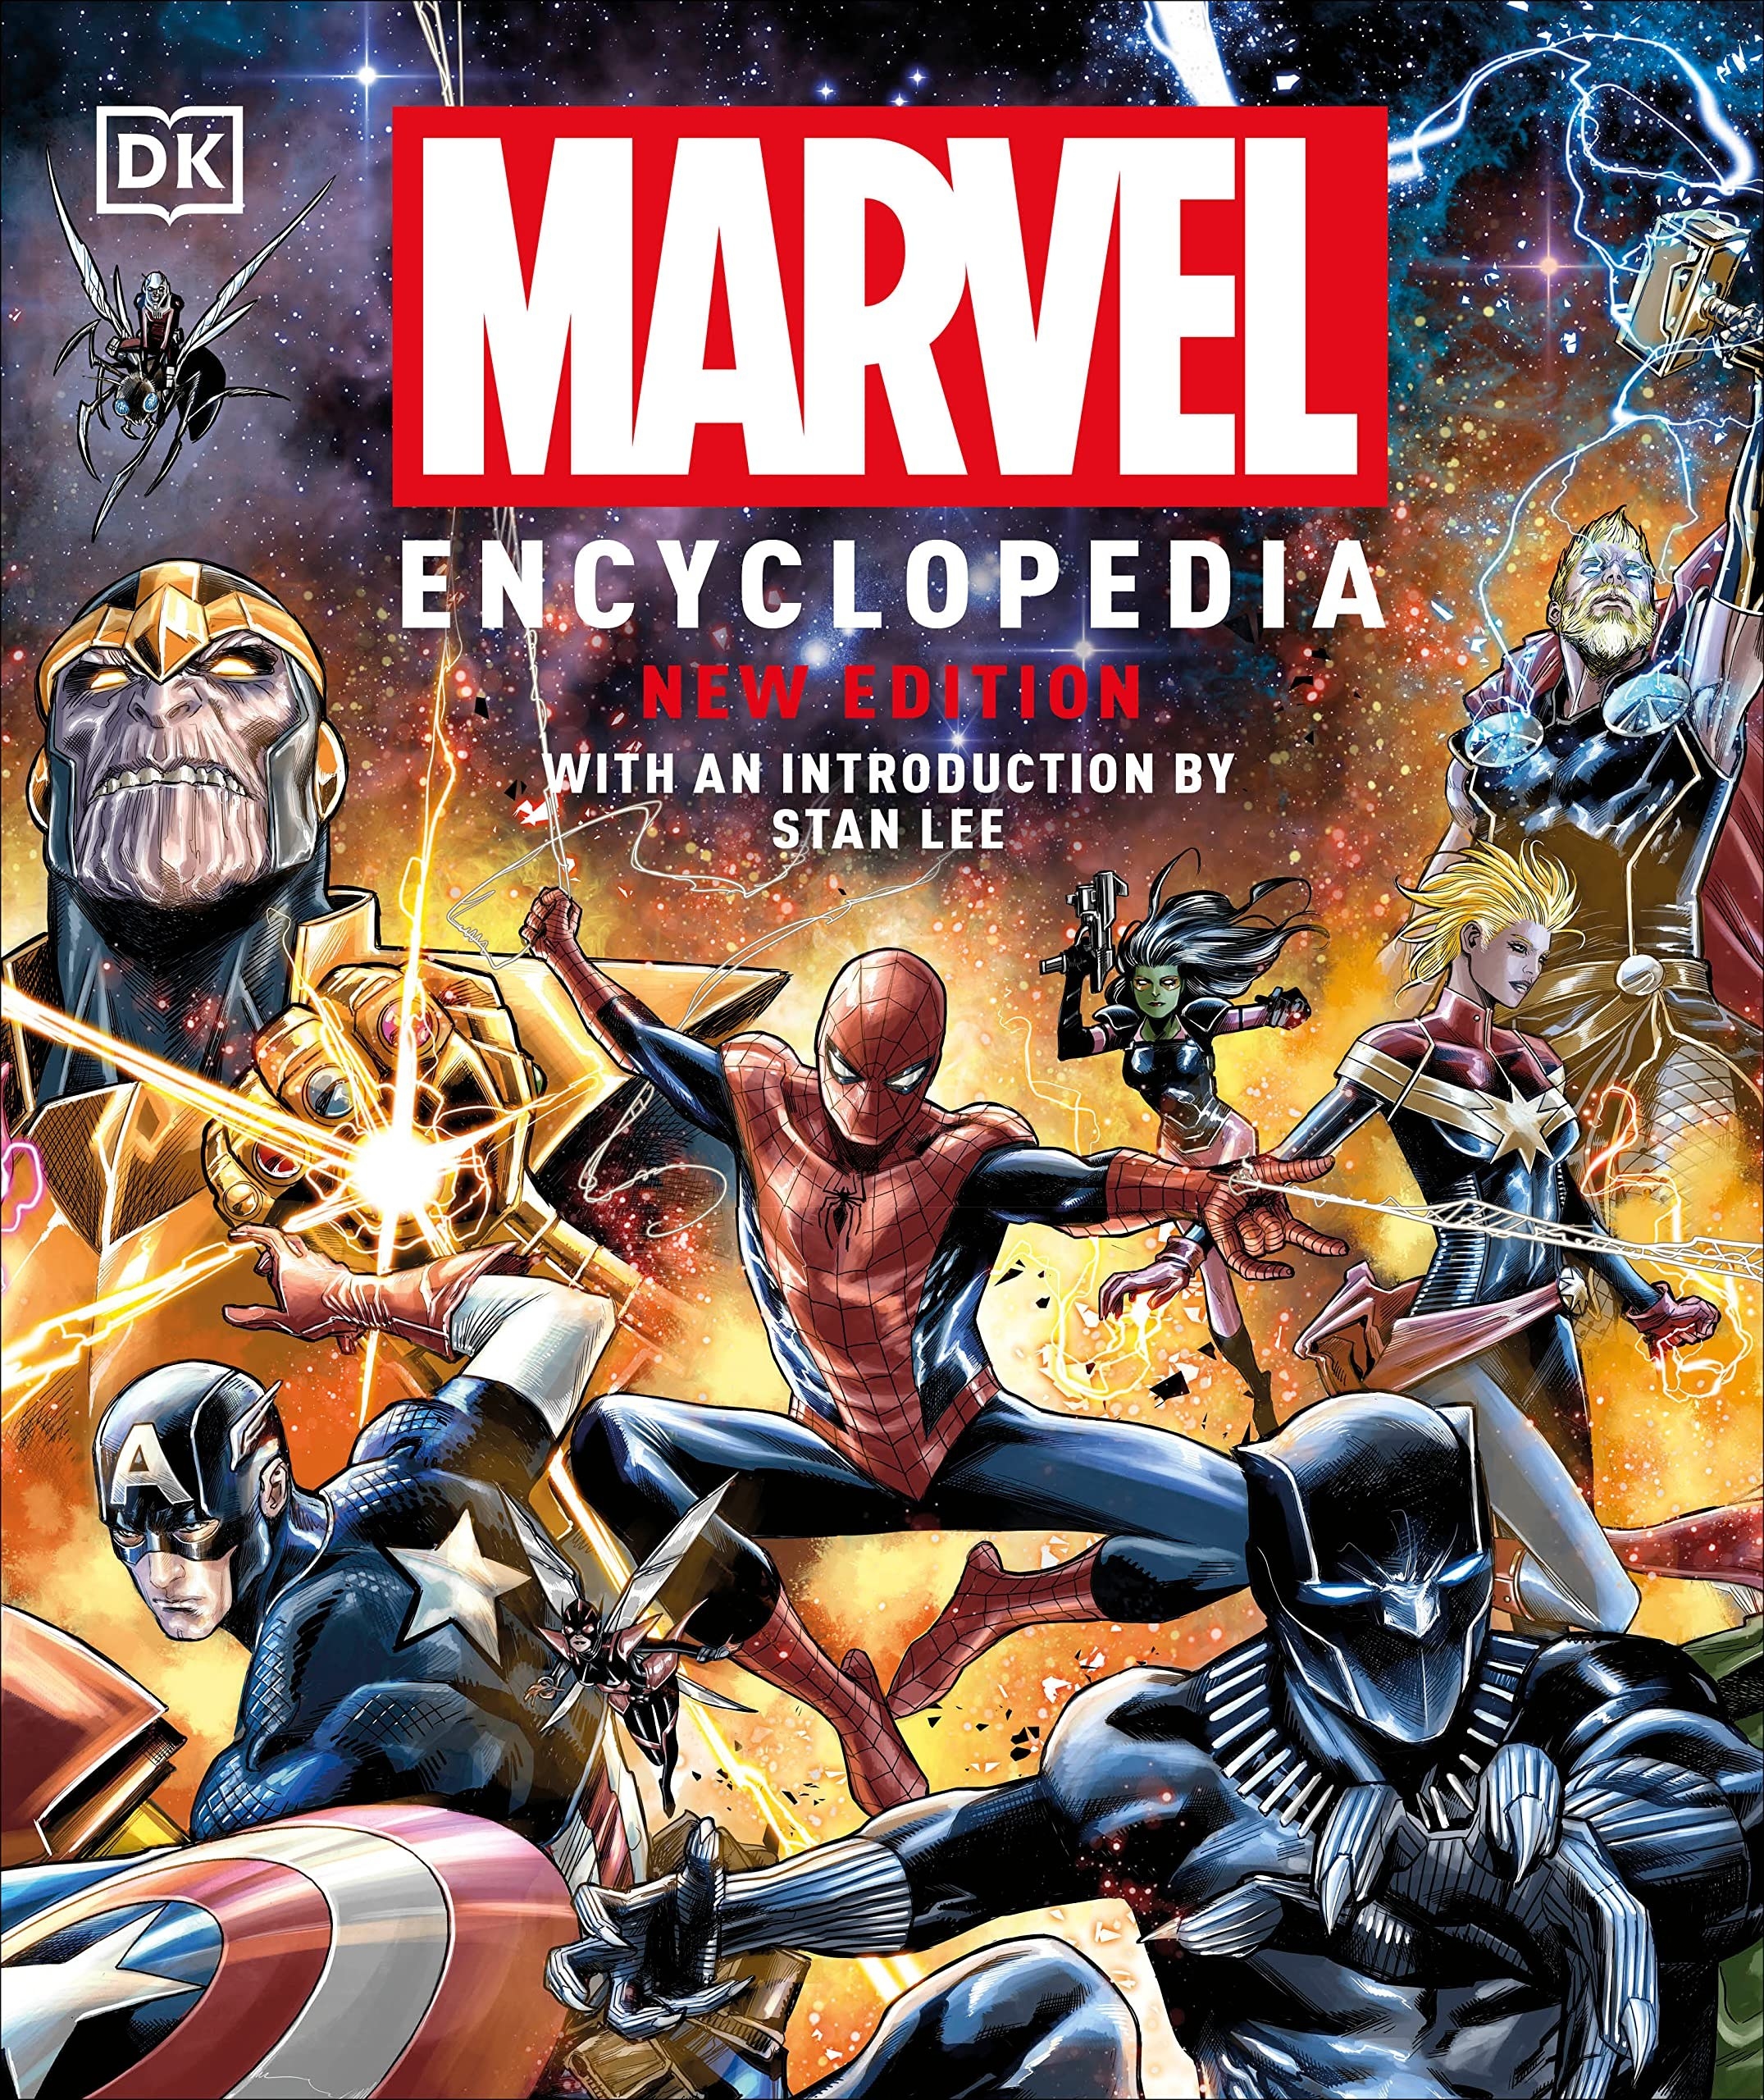 The cover of the book with superheroes on it